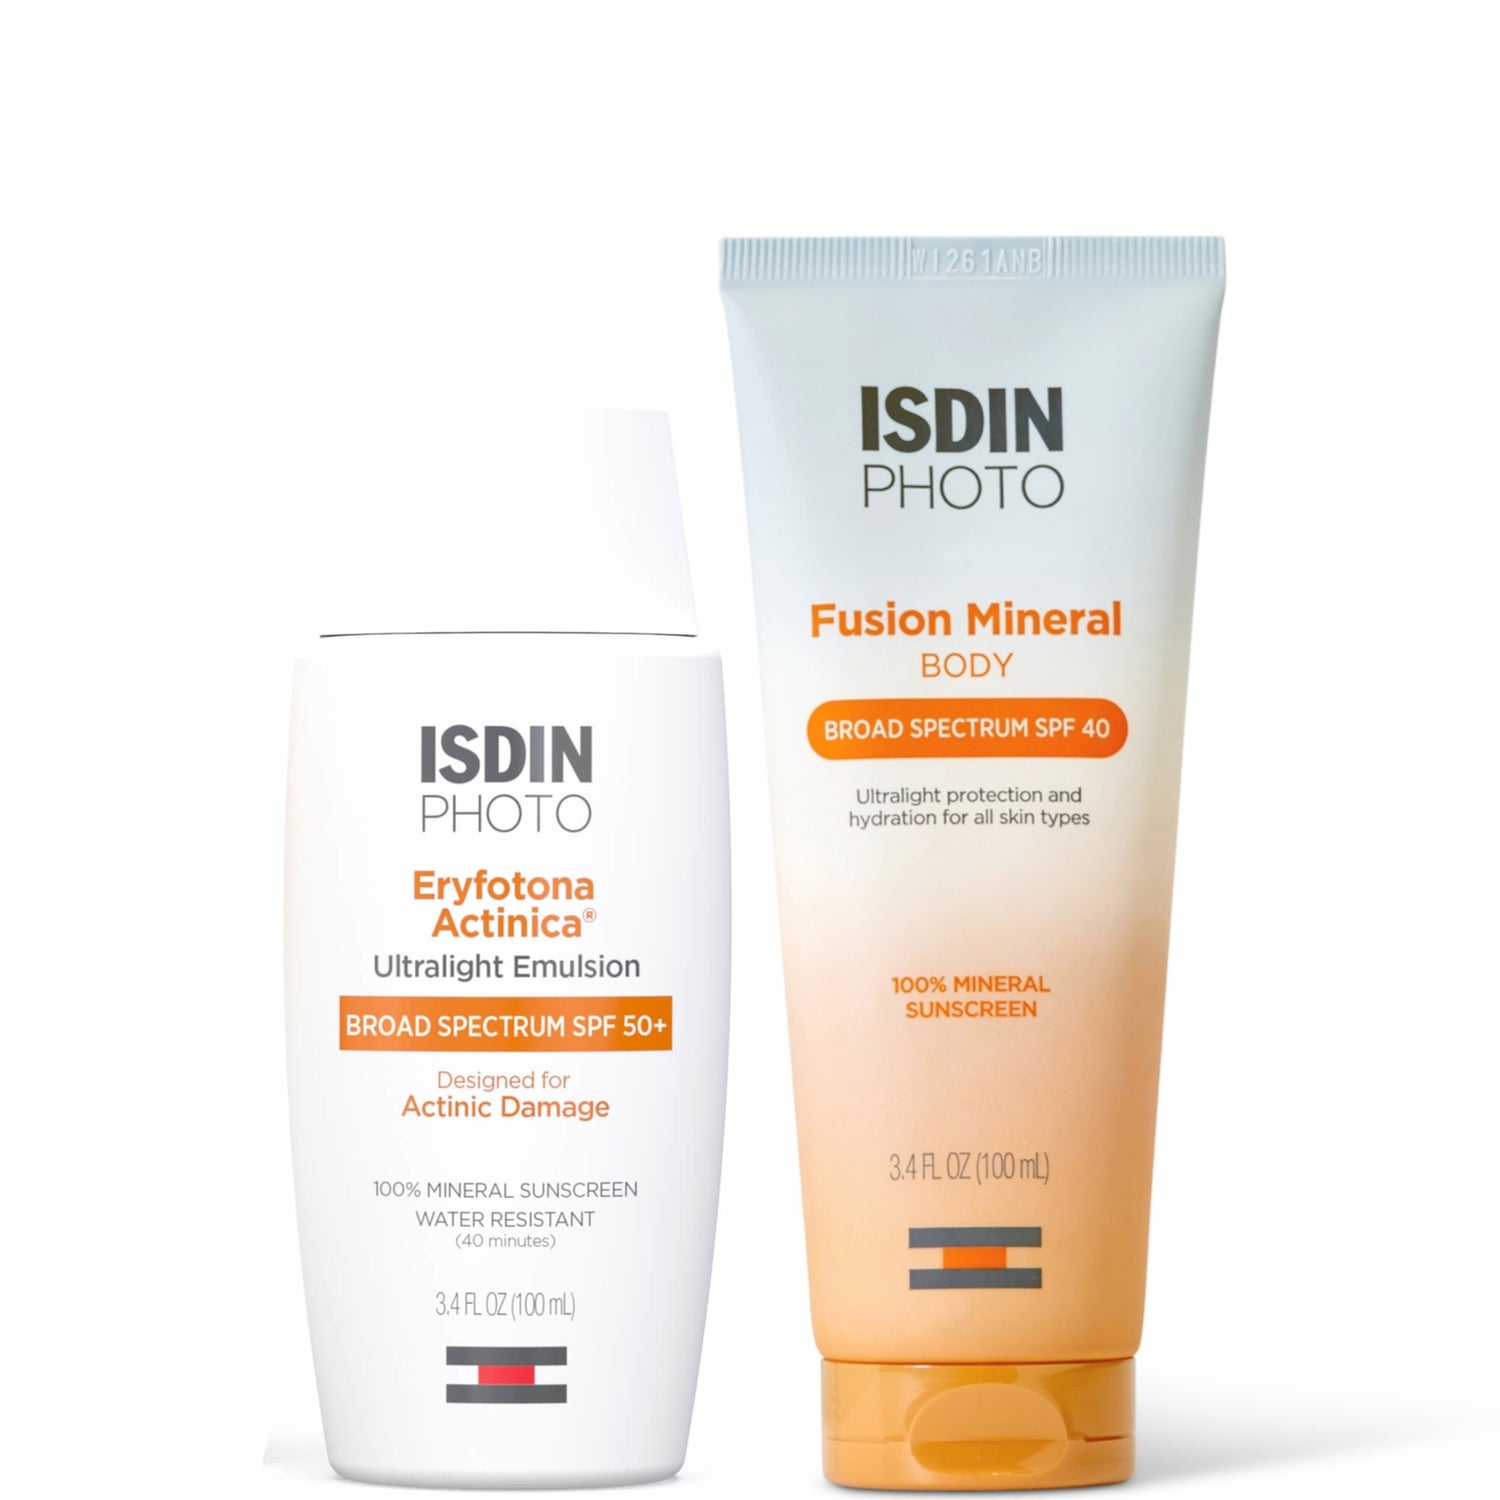 ISDIN Complete Protection Set ($118 Value)